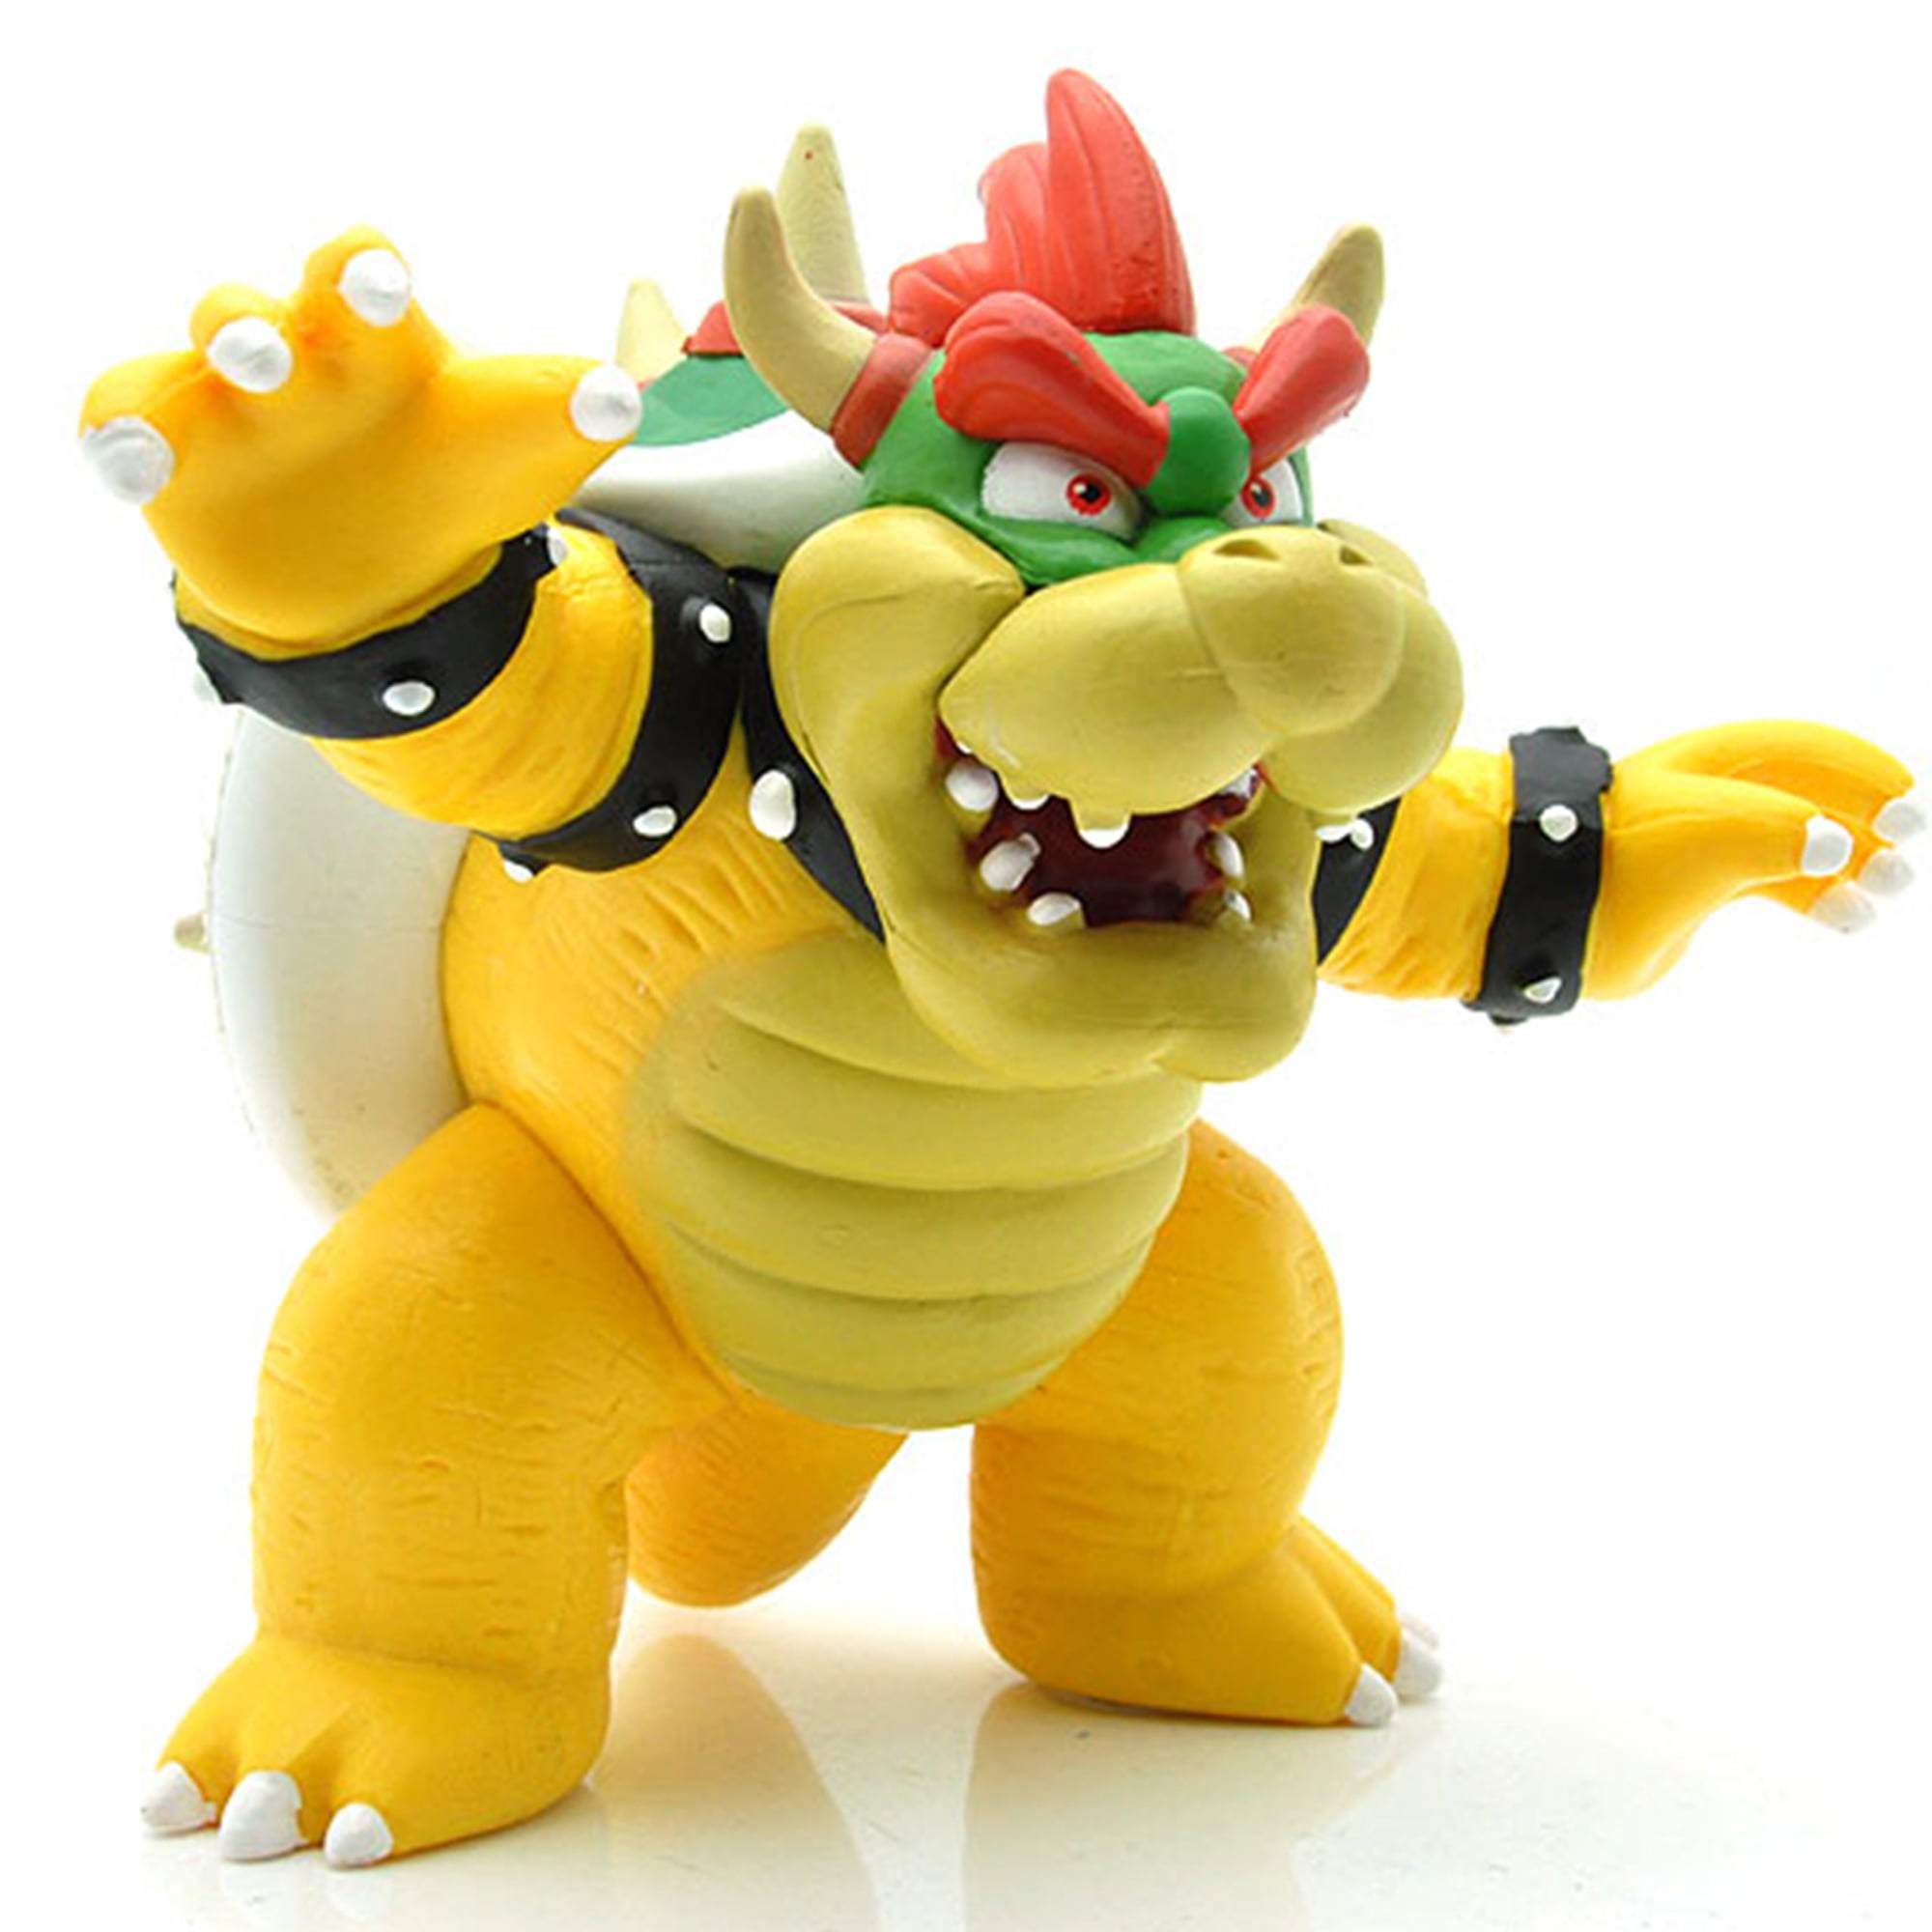 NEW Super Mario Bros Bowser Action Figure Collection Model Doll 9CM Gift 